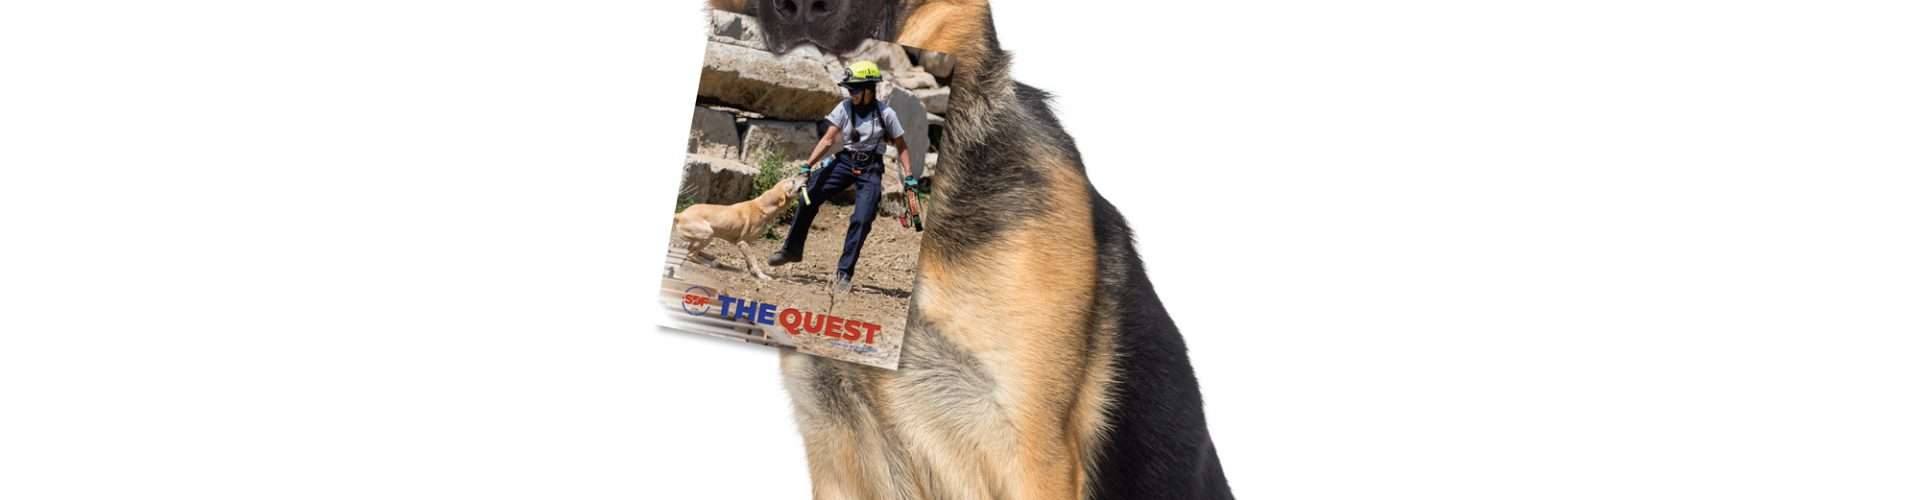 The Quest 2021